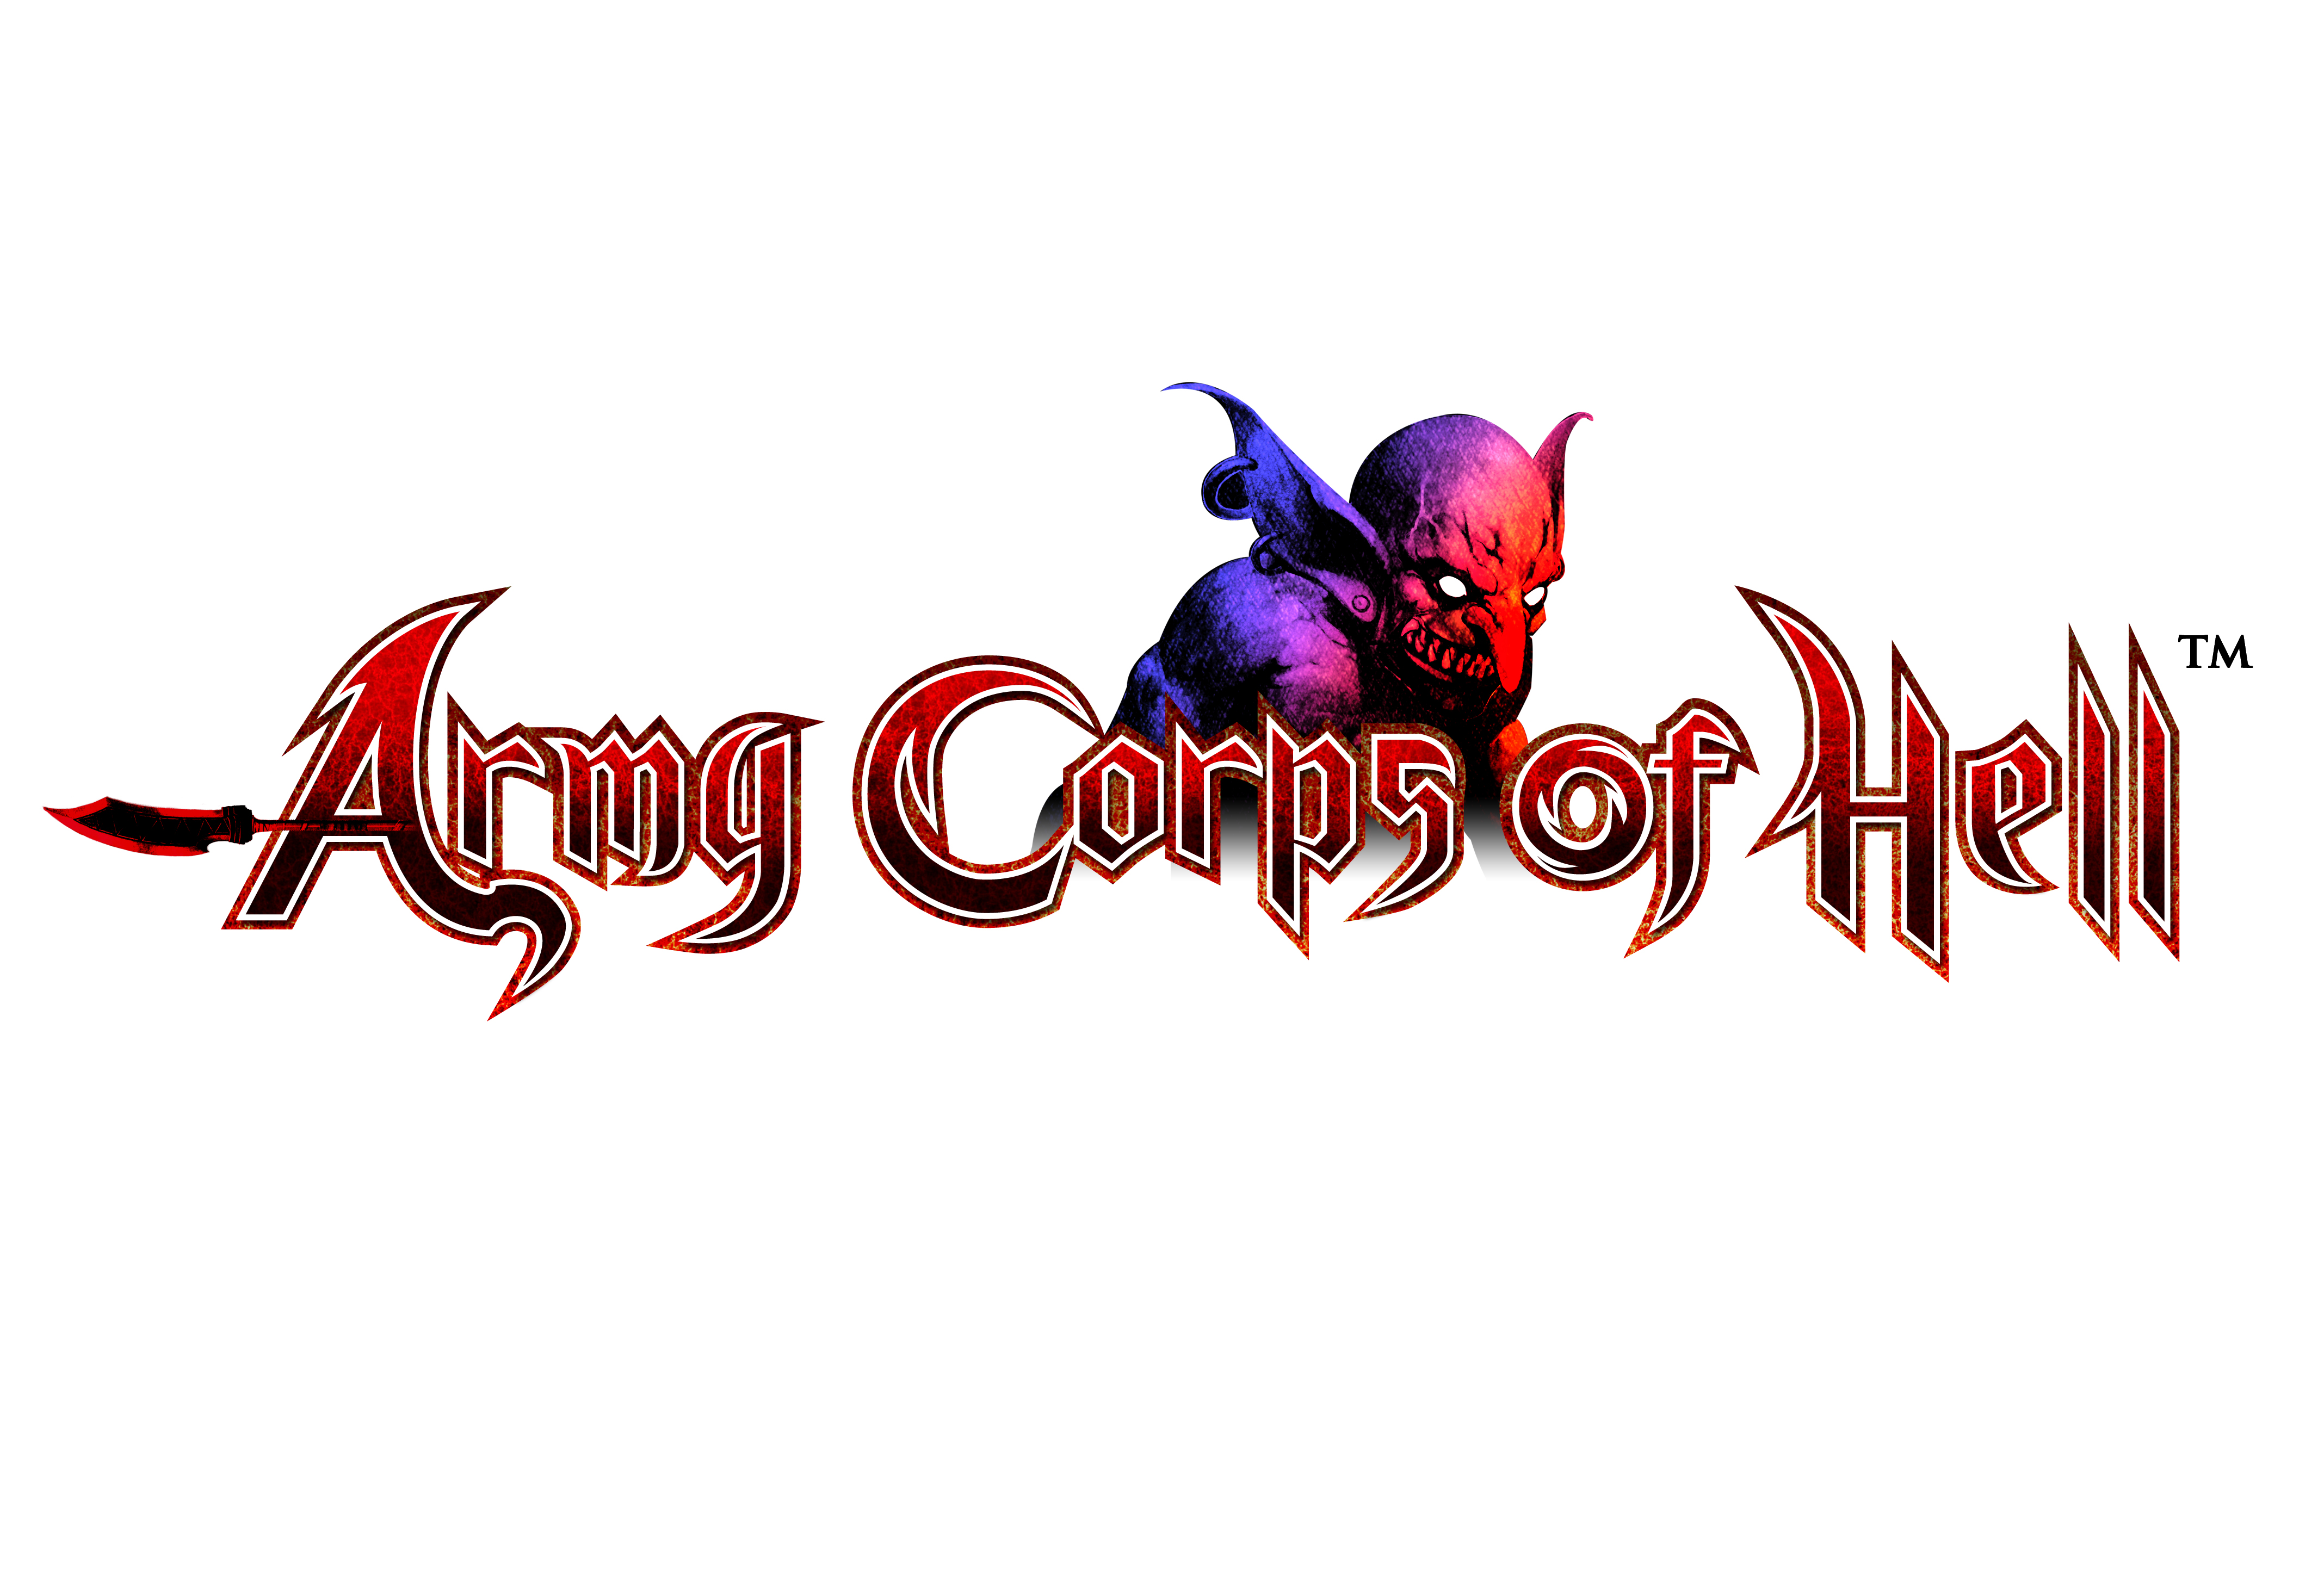 Army Corps Of Hell HD wallpapers, Desktop wallpaper - most viewed